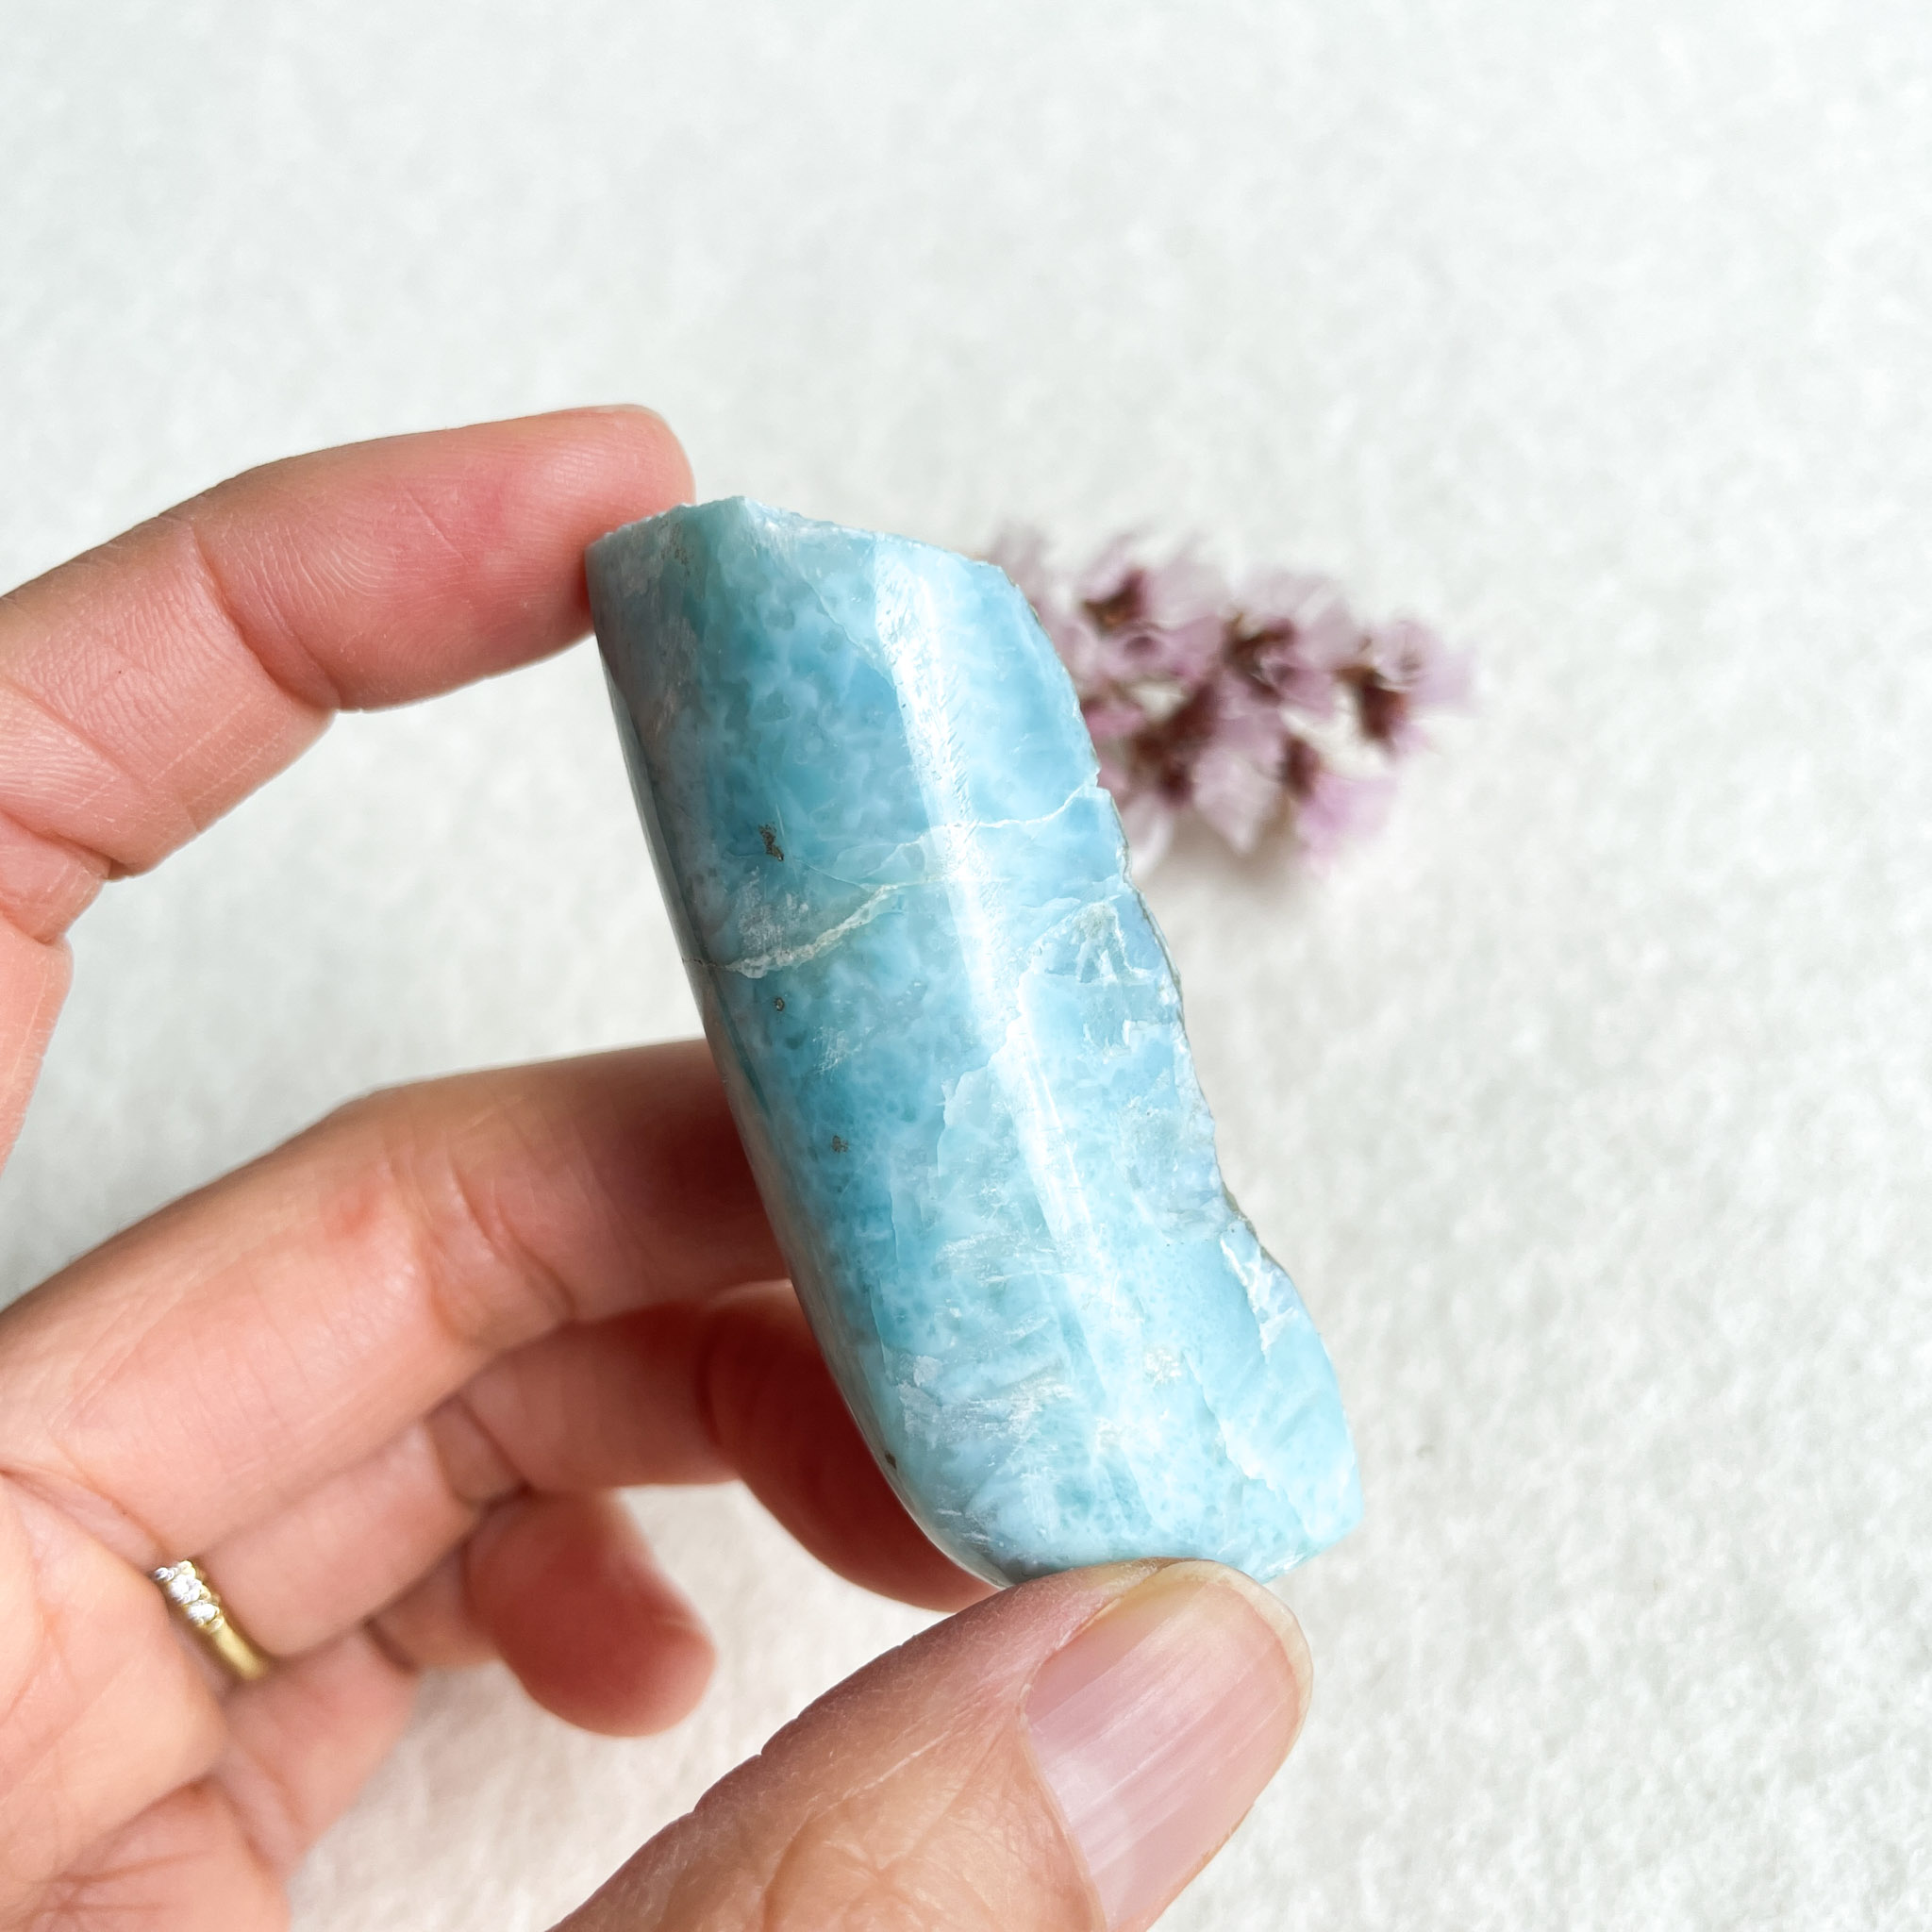 A person's fingers holding a polished light blue aquamarine crystal with natural fractures, against a white background with a blurred cluster of small purple flowers in the corner.